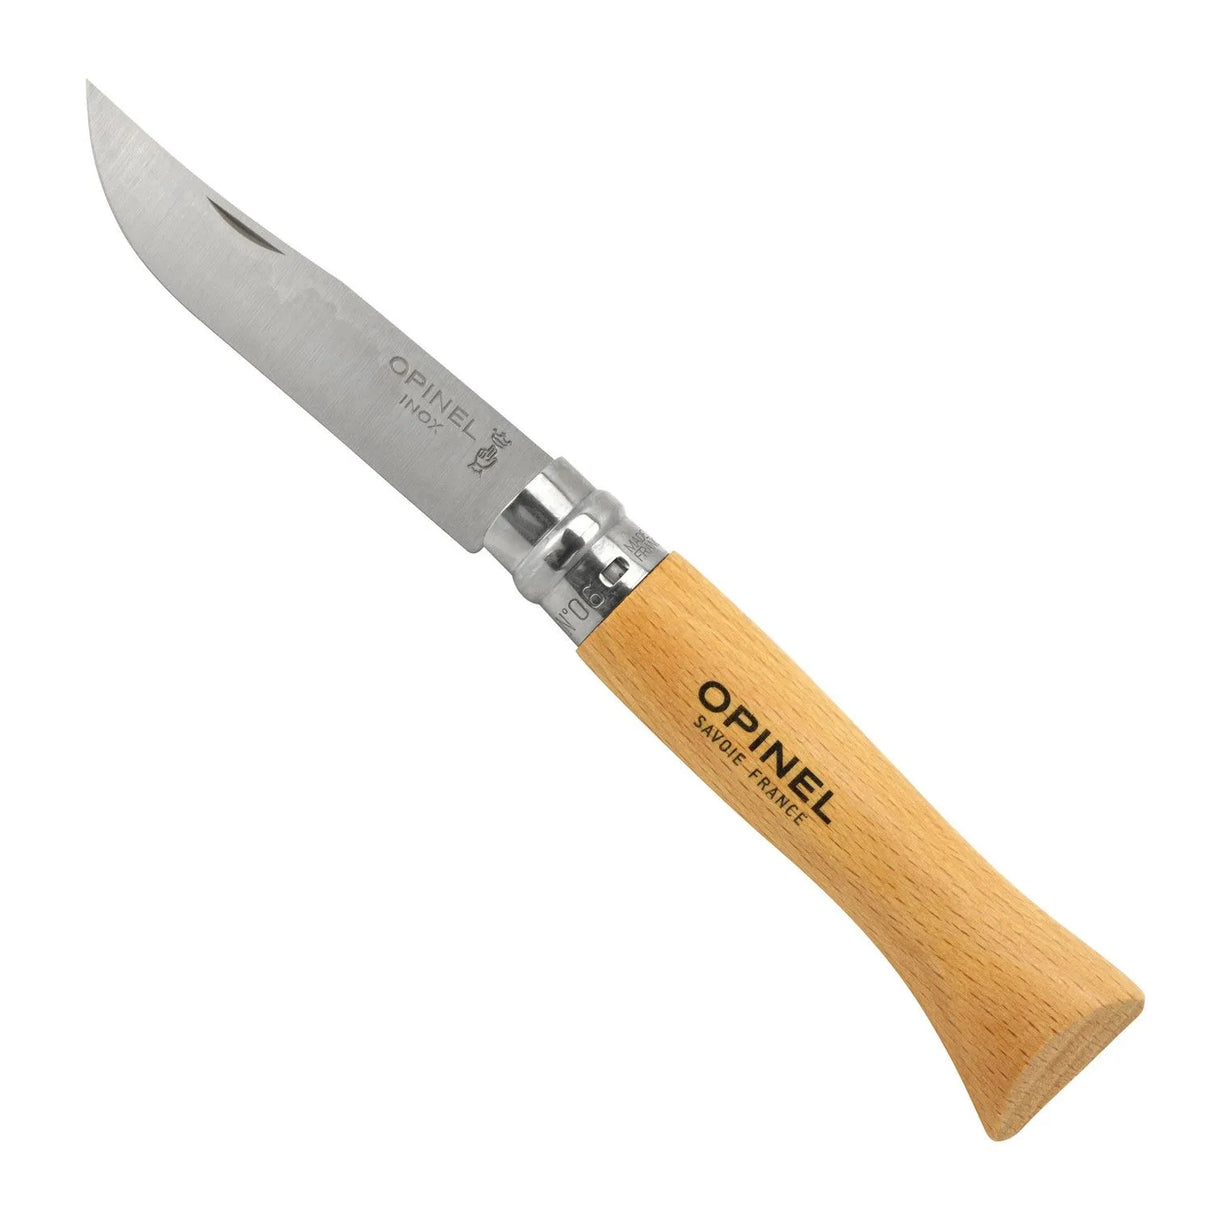 opinel-blister-pack-no-06-stainless-steel-不鏽鋼摺刀的第1張產品相片